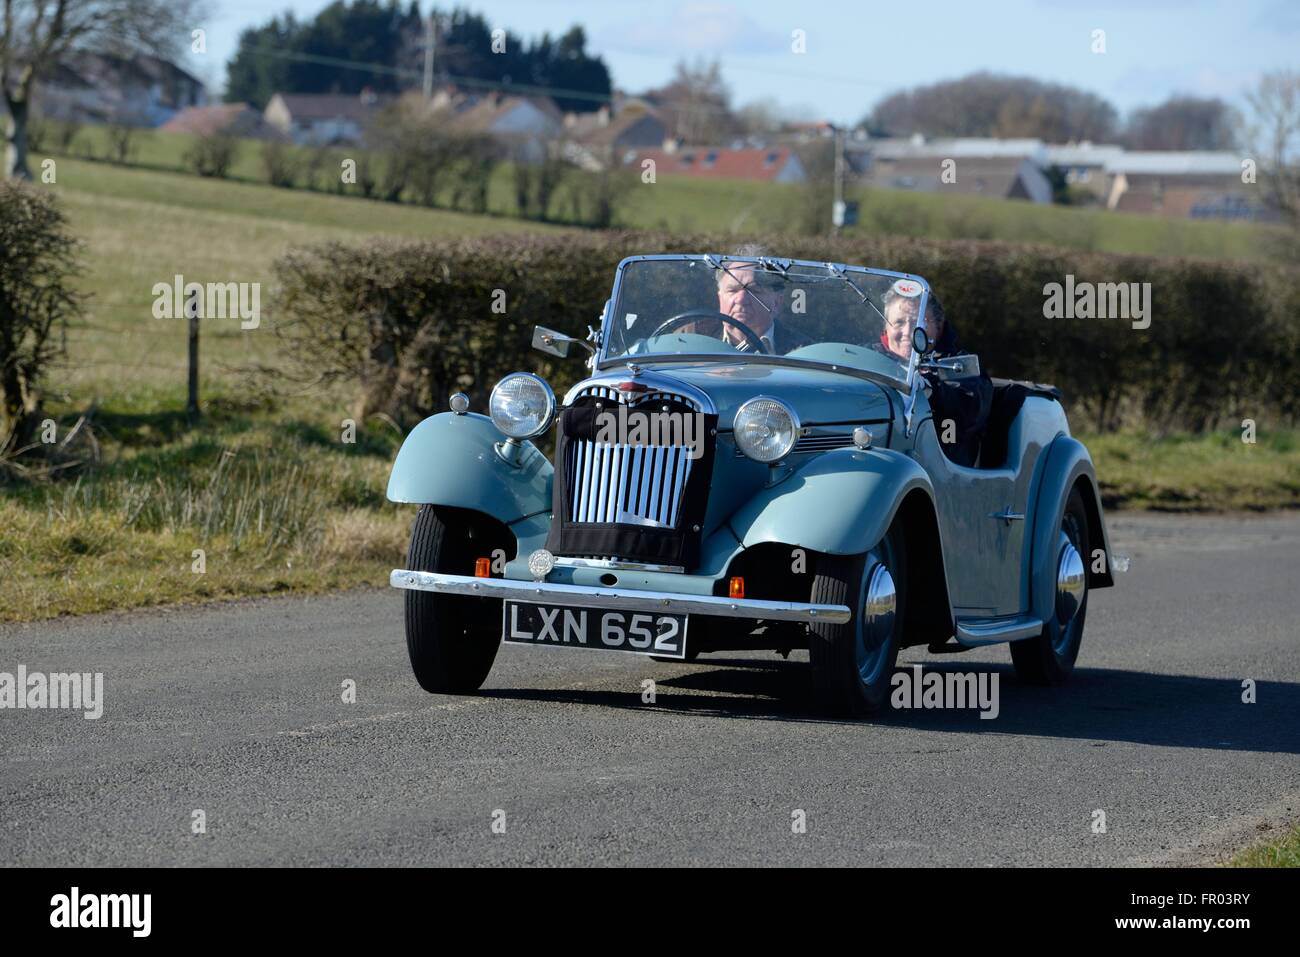 Eaglesham,  East Renfrewshire, Scotland, UK. 20th March, 2016. Fine weather in the Glasgow area allowed this couple the enjoyment of having the roof down on their Singer Roadster 4AB classic car. Stock Photo